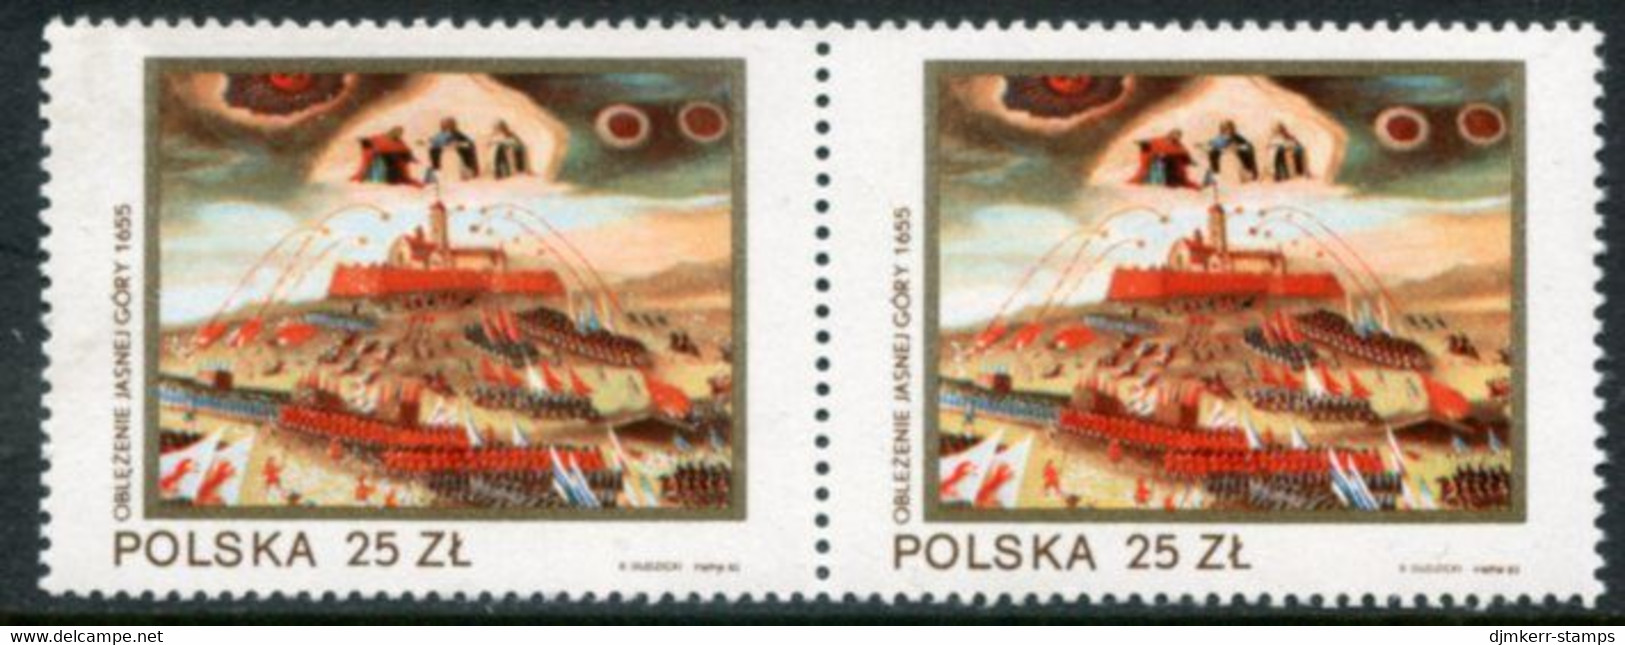 POLAND 1982 Black Madonna Ikon Variety In Pair With Normal MNH / **.  Michel 2819 I; Fischer 2671 B1 - Unused Stamps